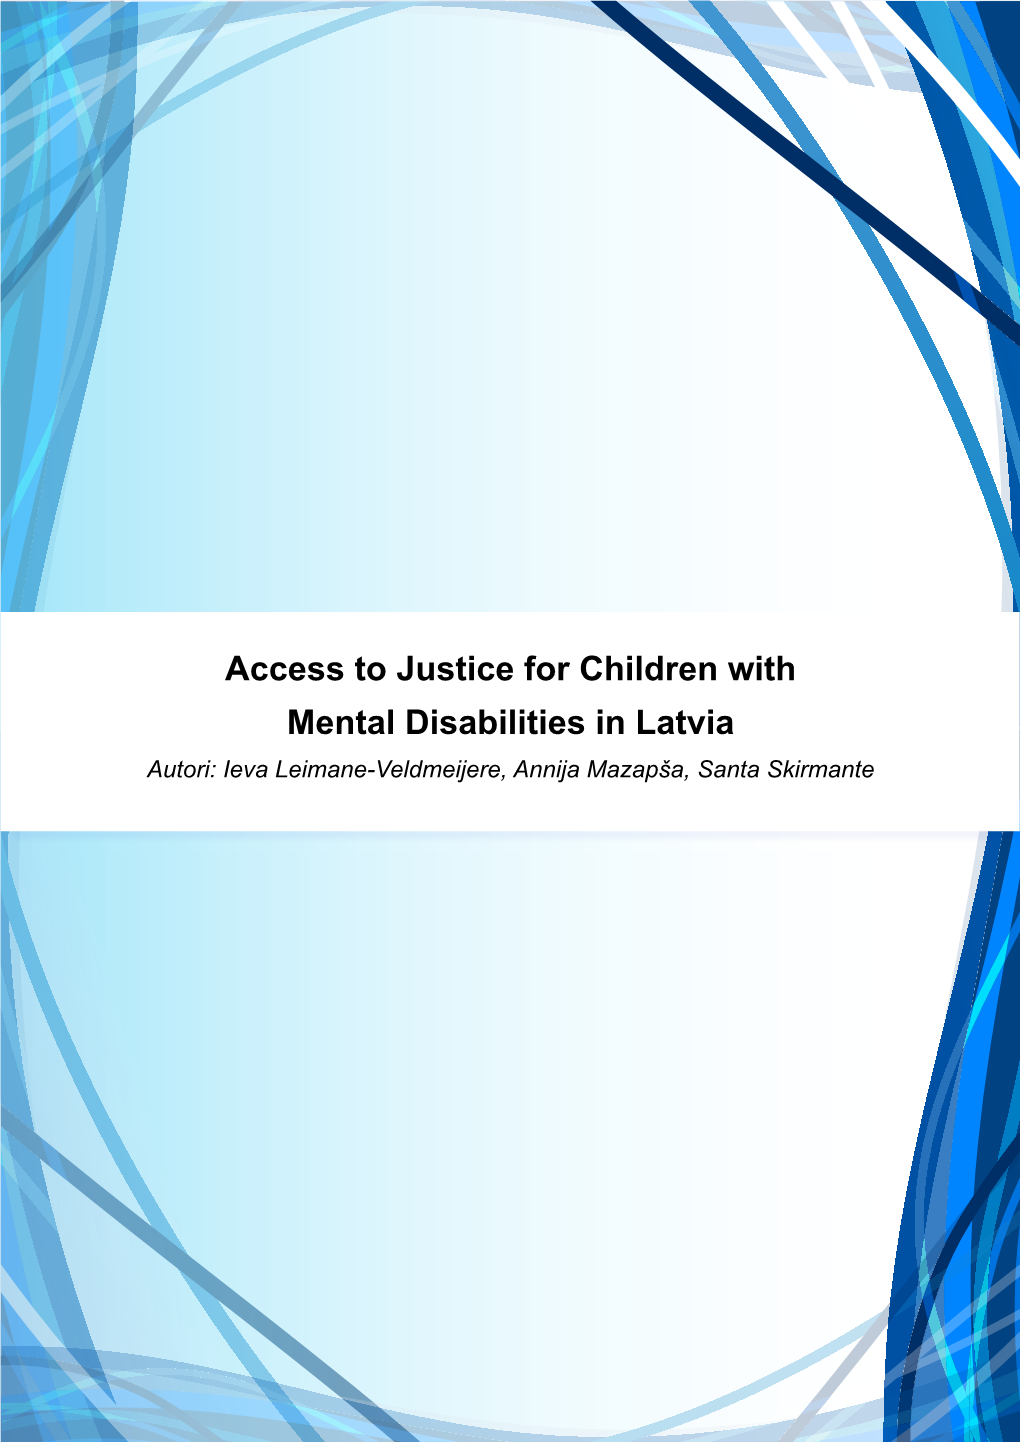 Access to Justice for Children with Mental Disabilities in Latvia